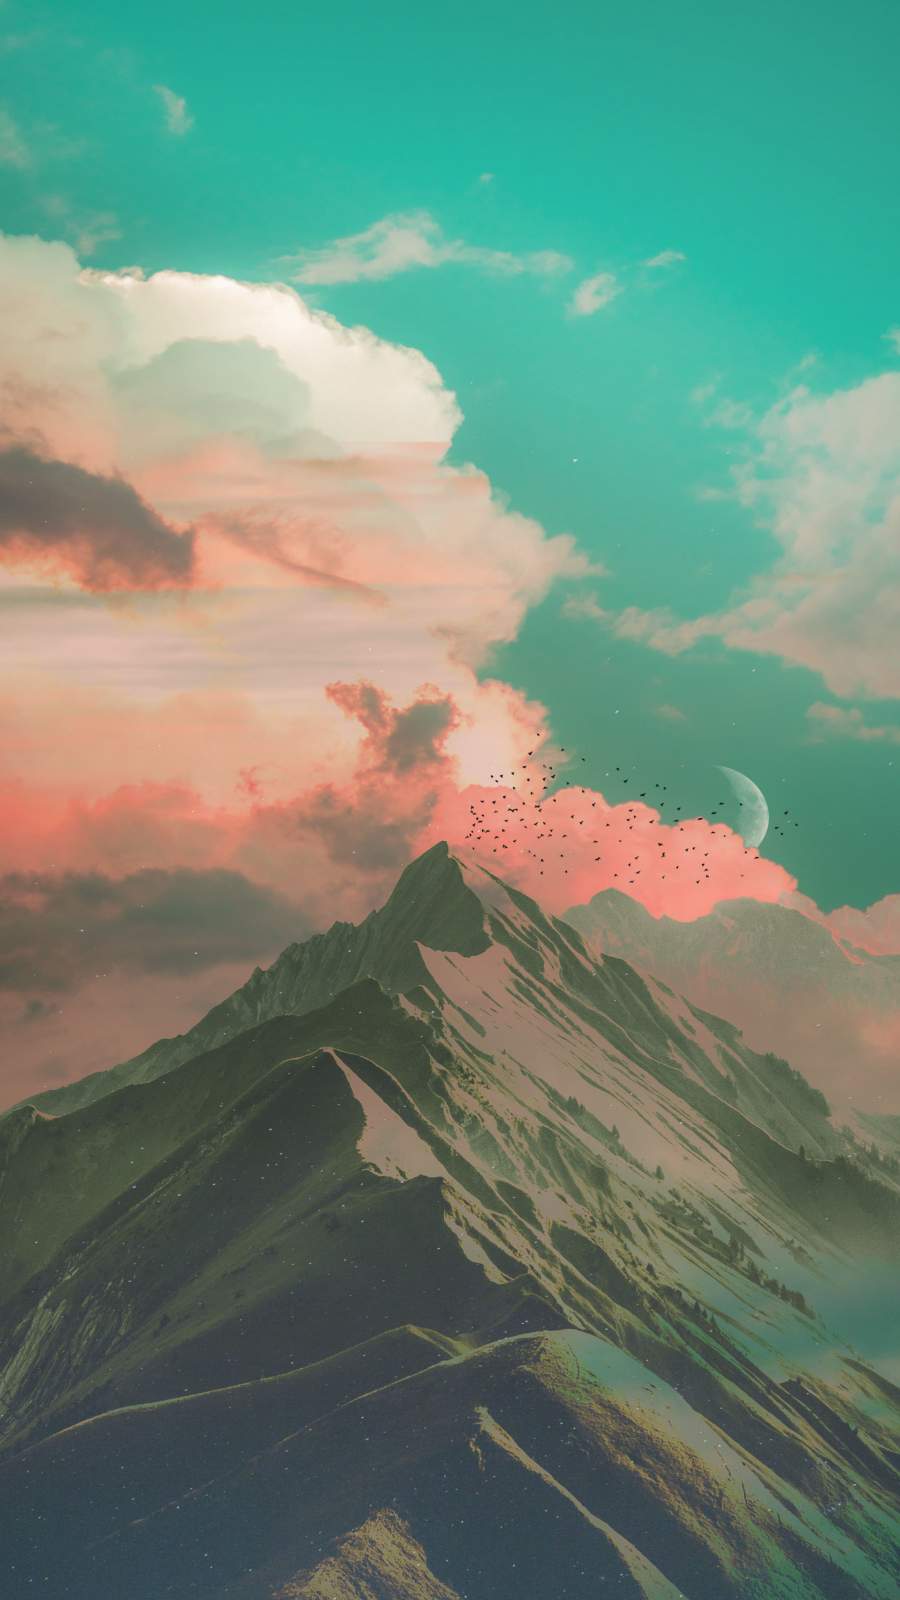 Aesthetic iphone background wallpaper